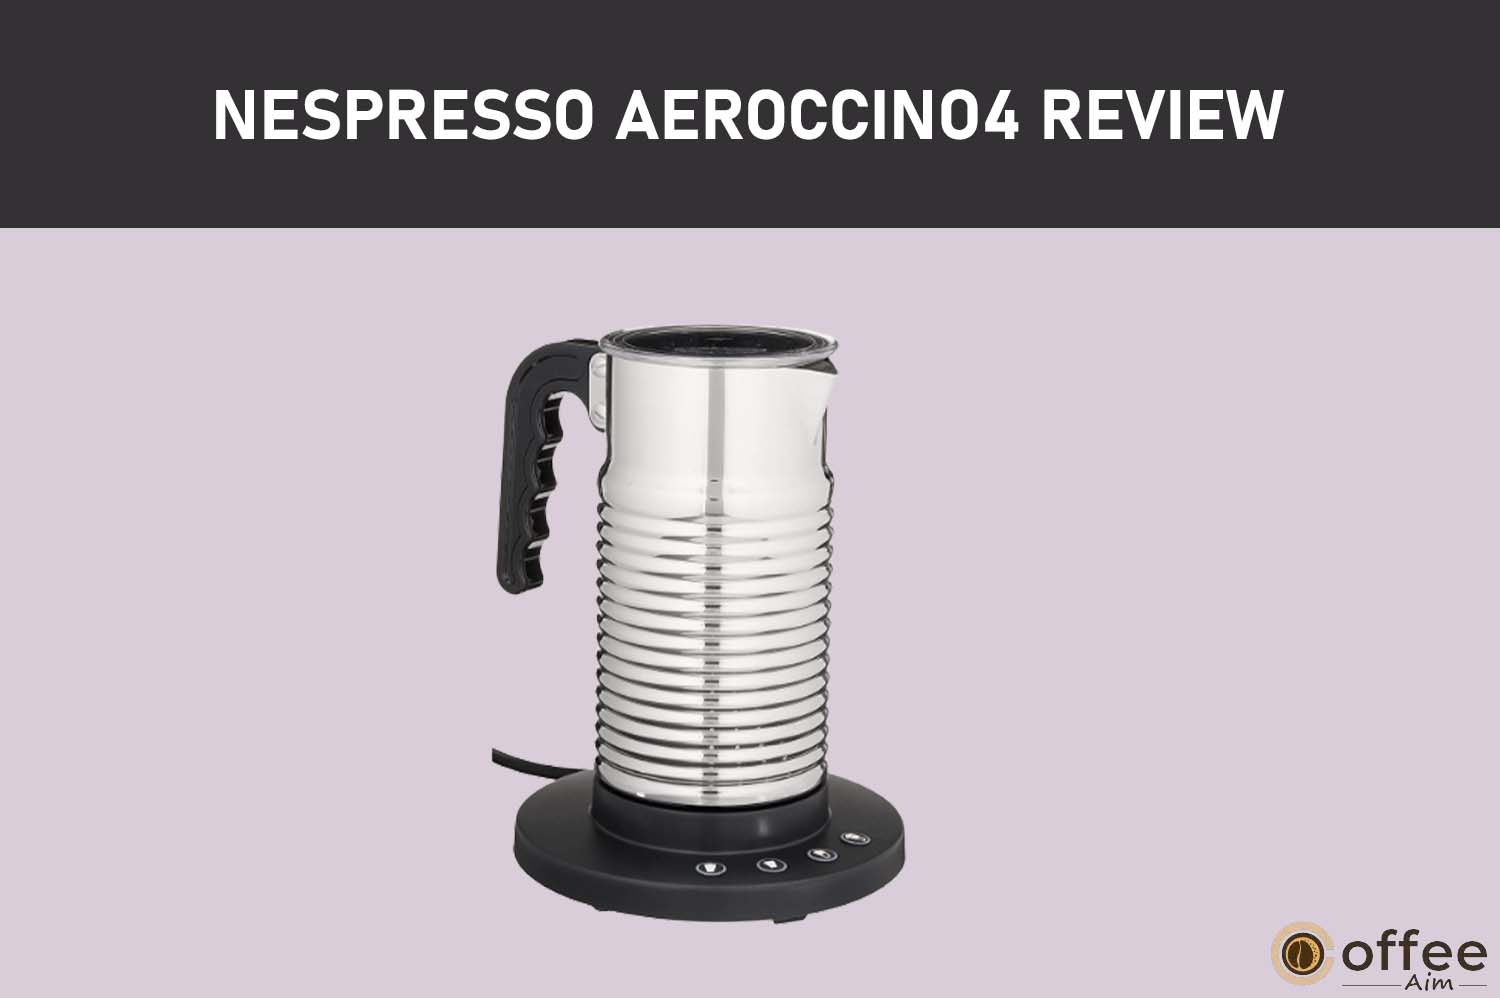 Featured image for the article "Nespresso Aeroccino4 Review"